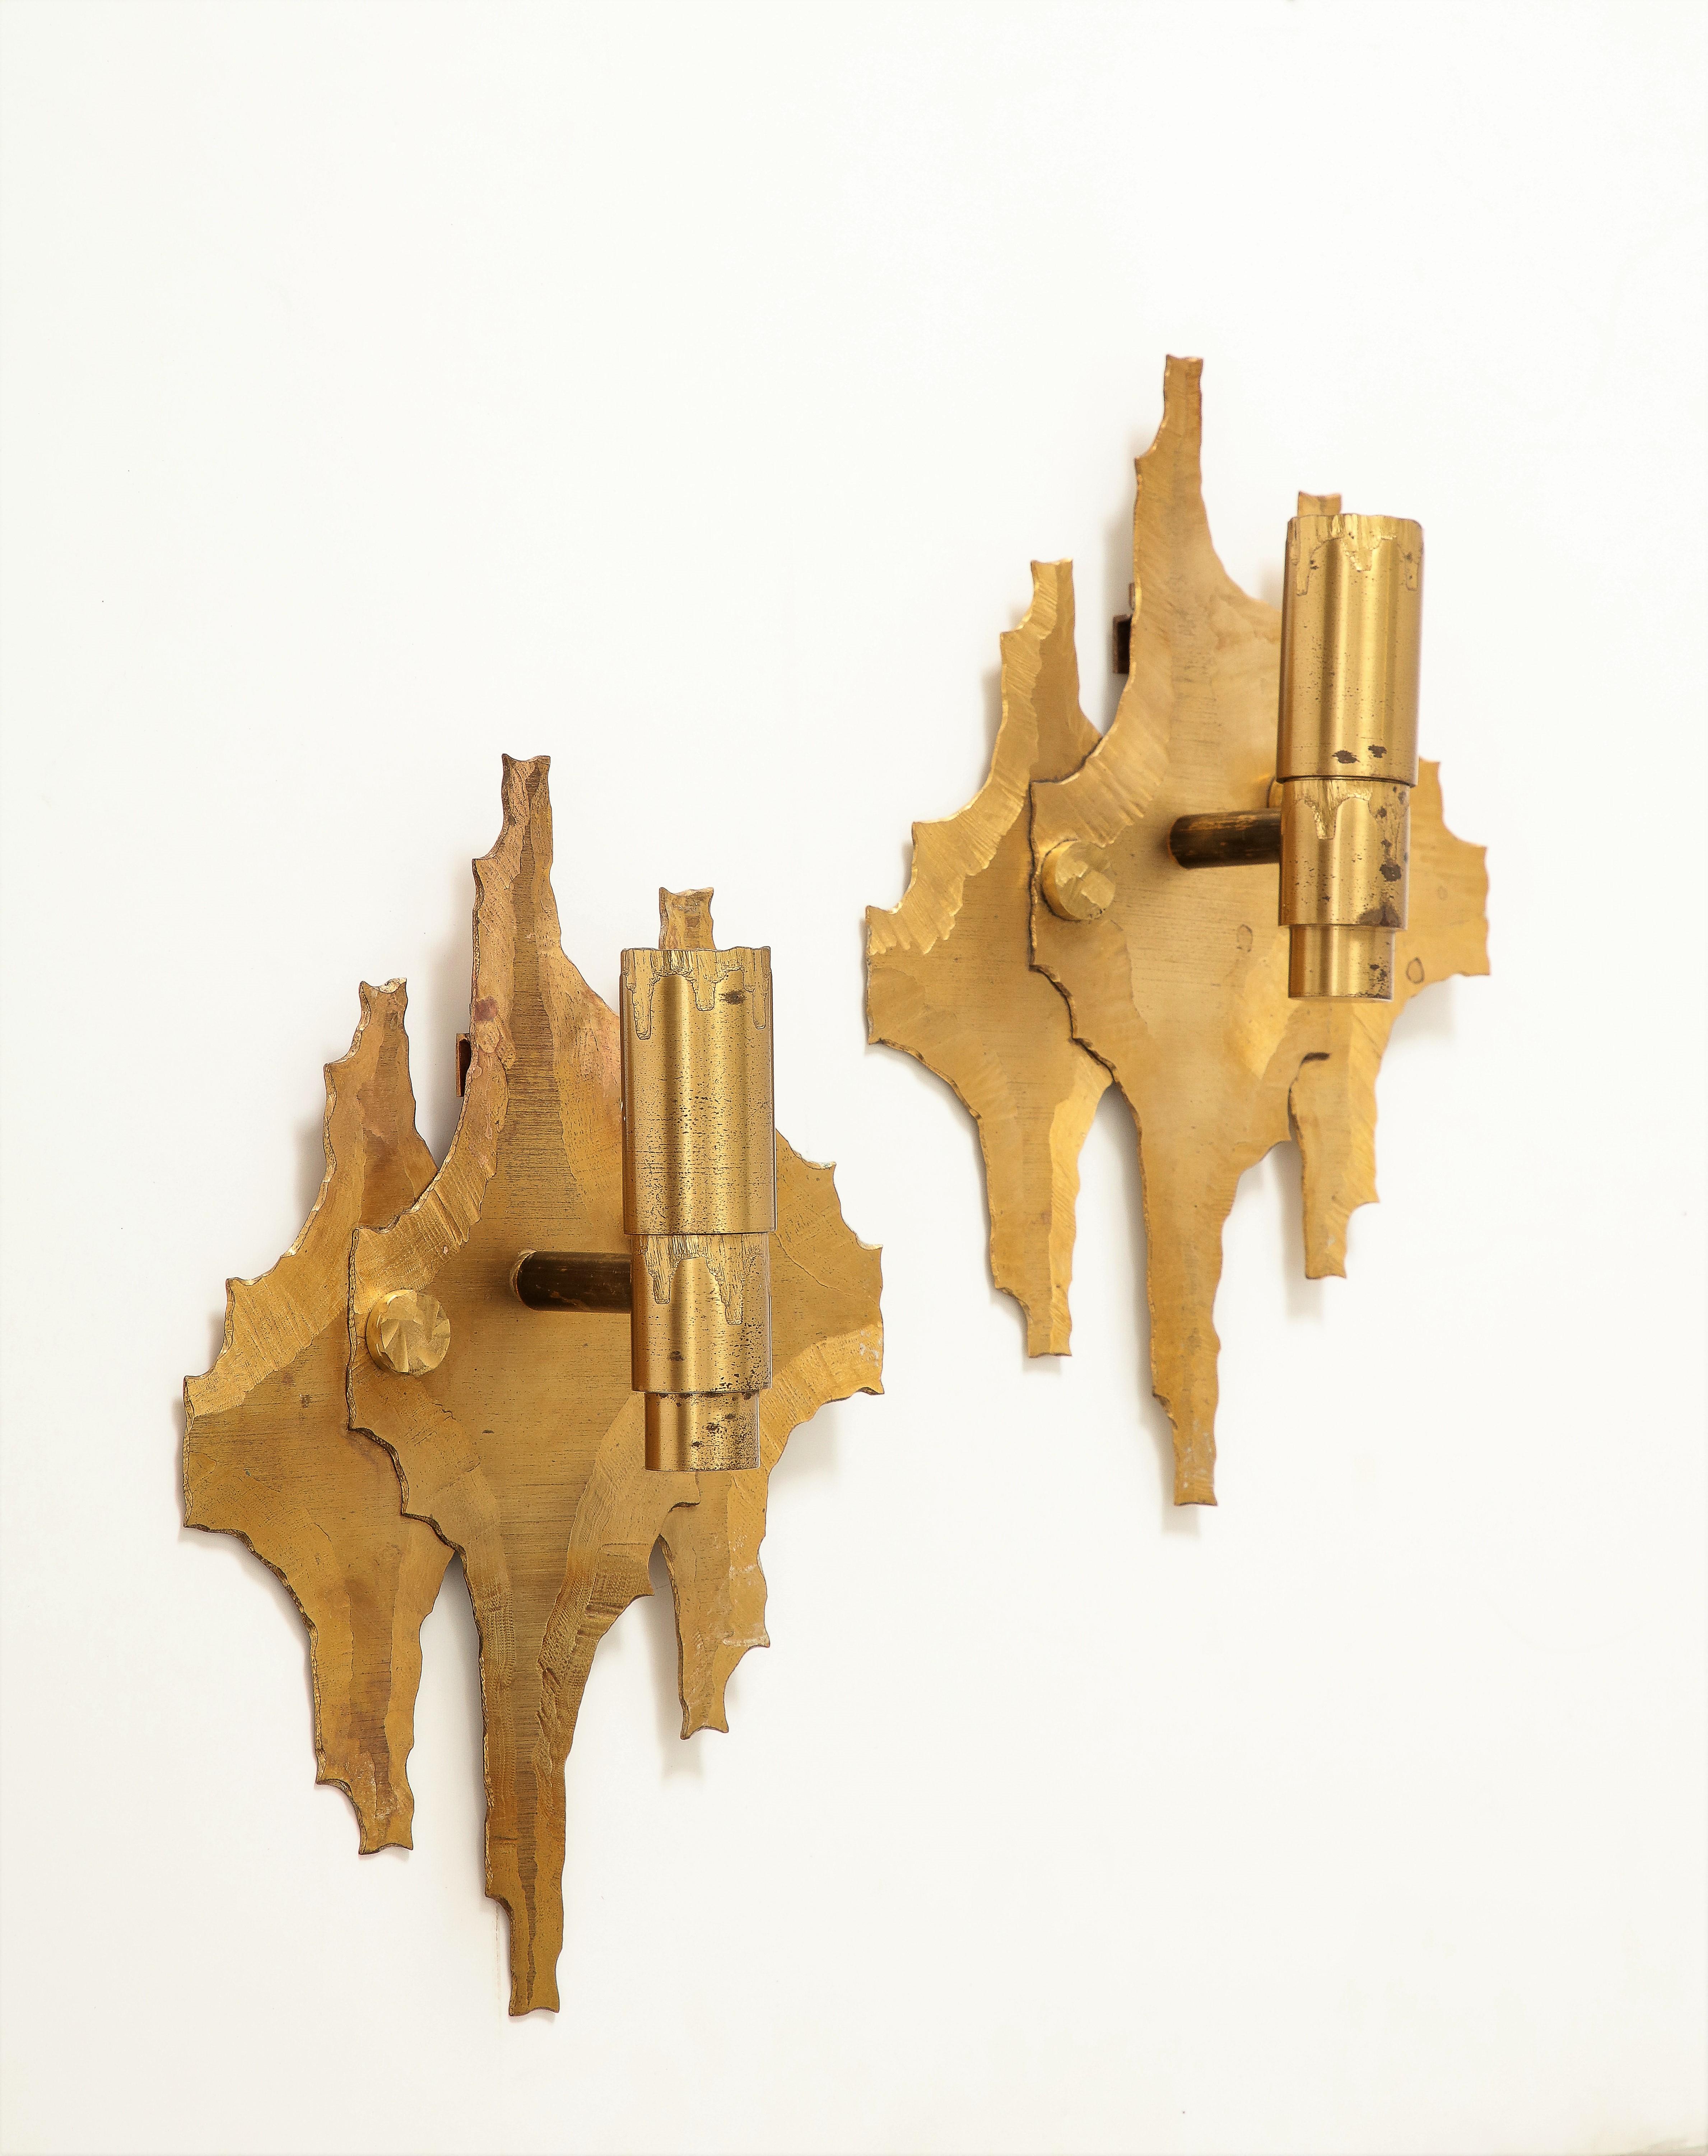 Pair of Brutalist Cut & Etched Brass Sconces - Germany 1970s For Sale 3